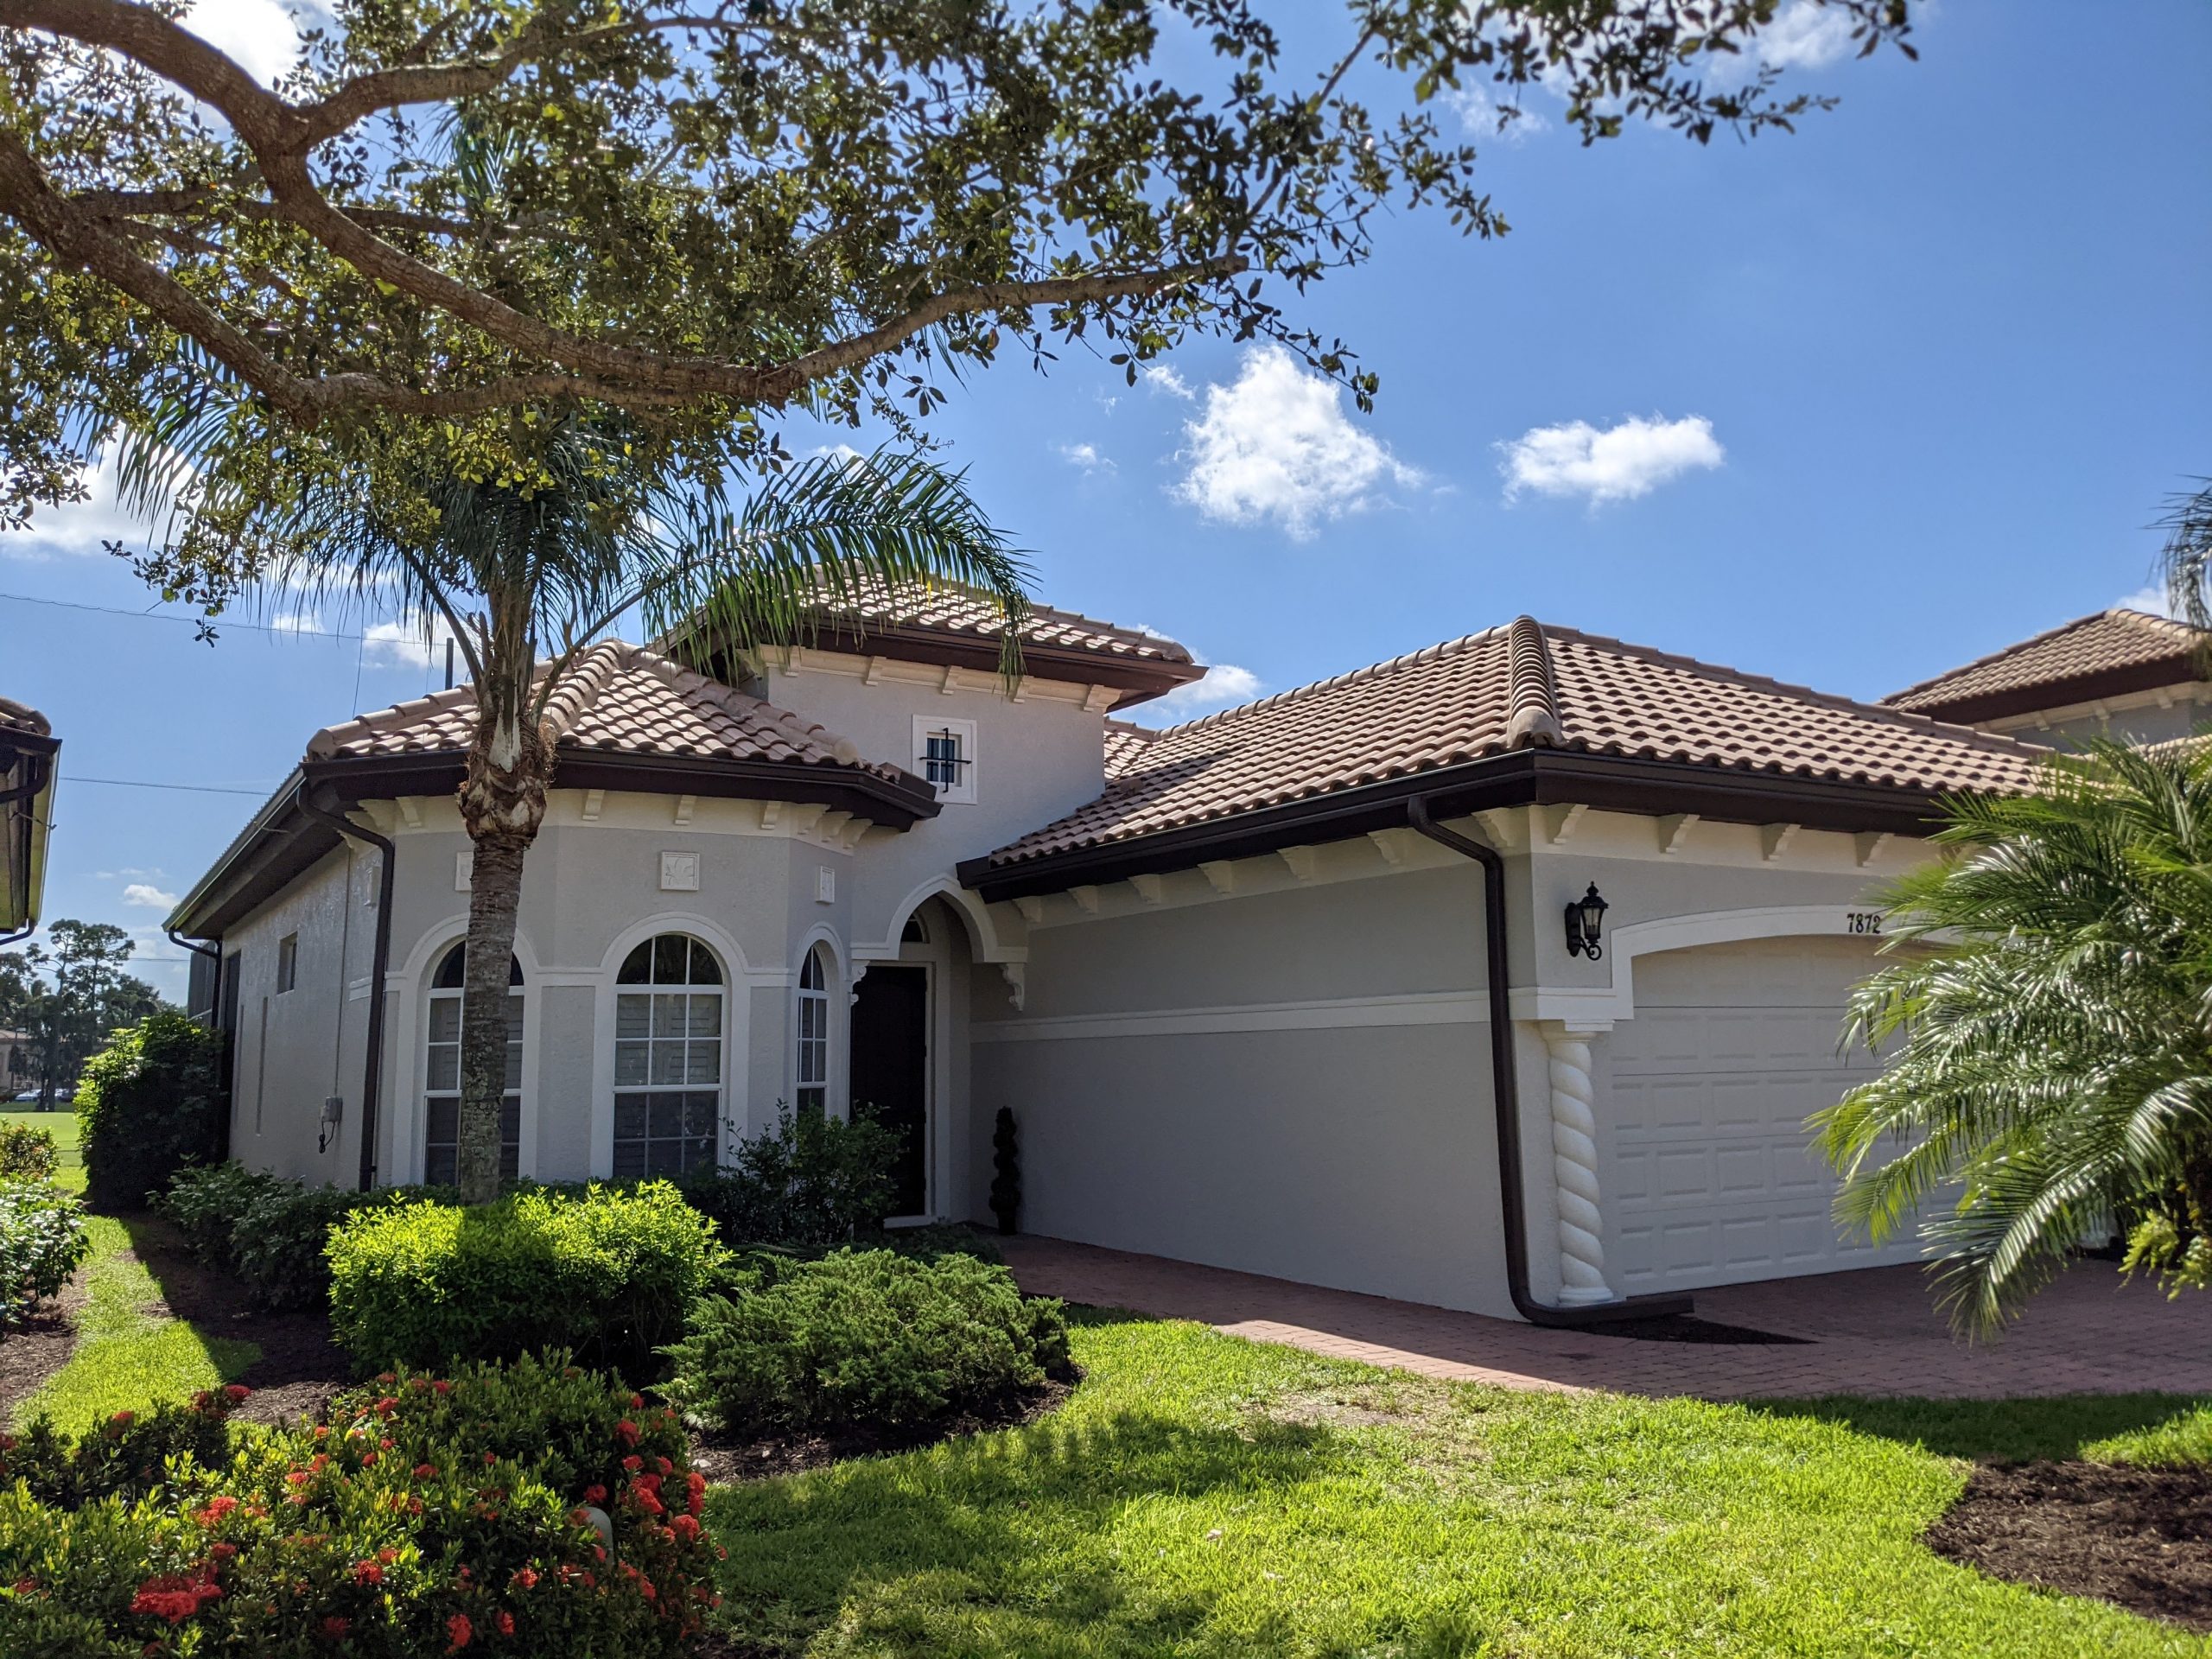 exterior of home in naples florida